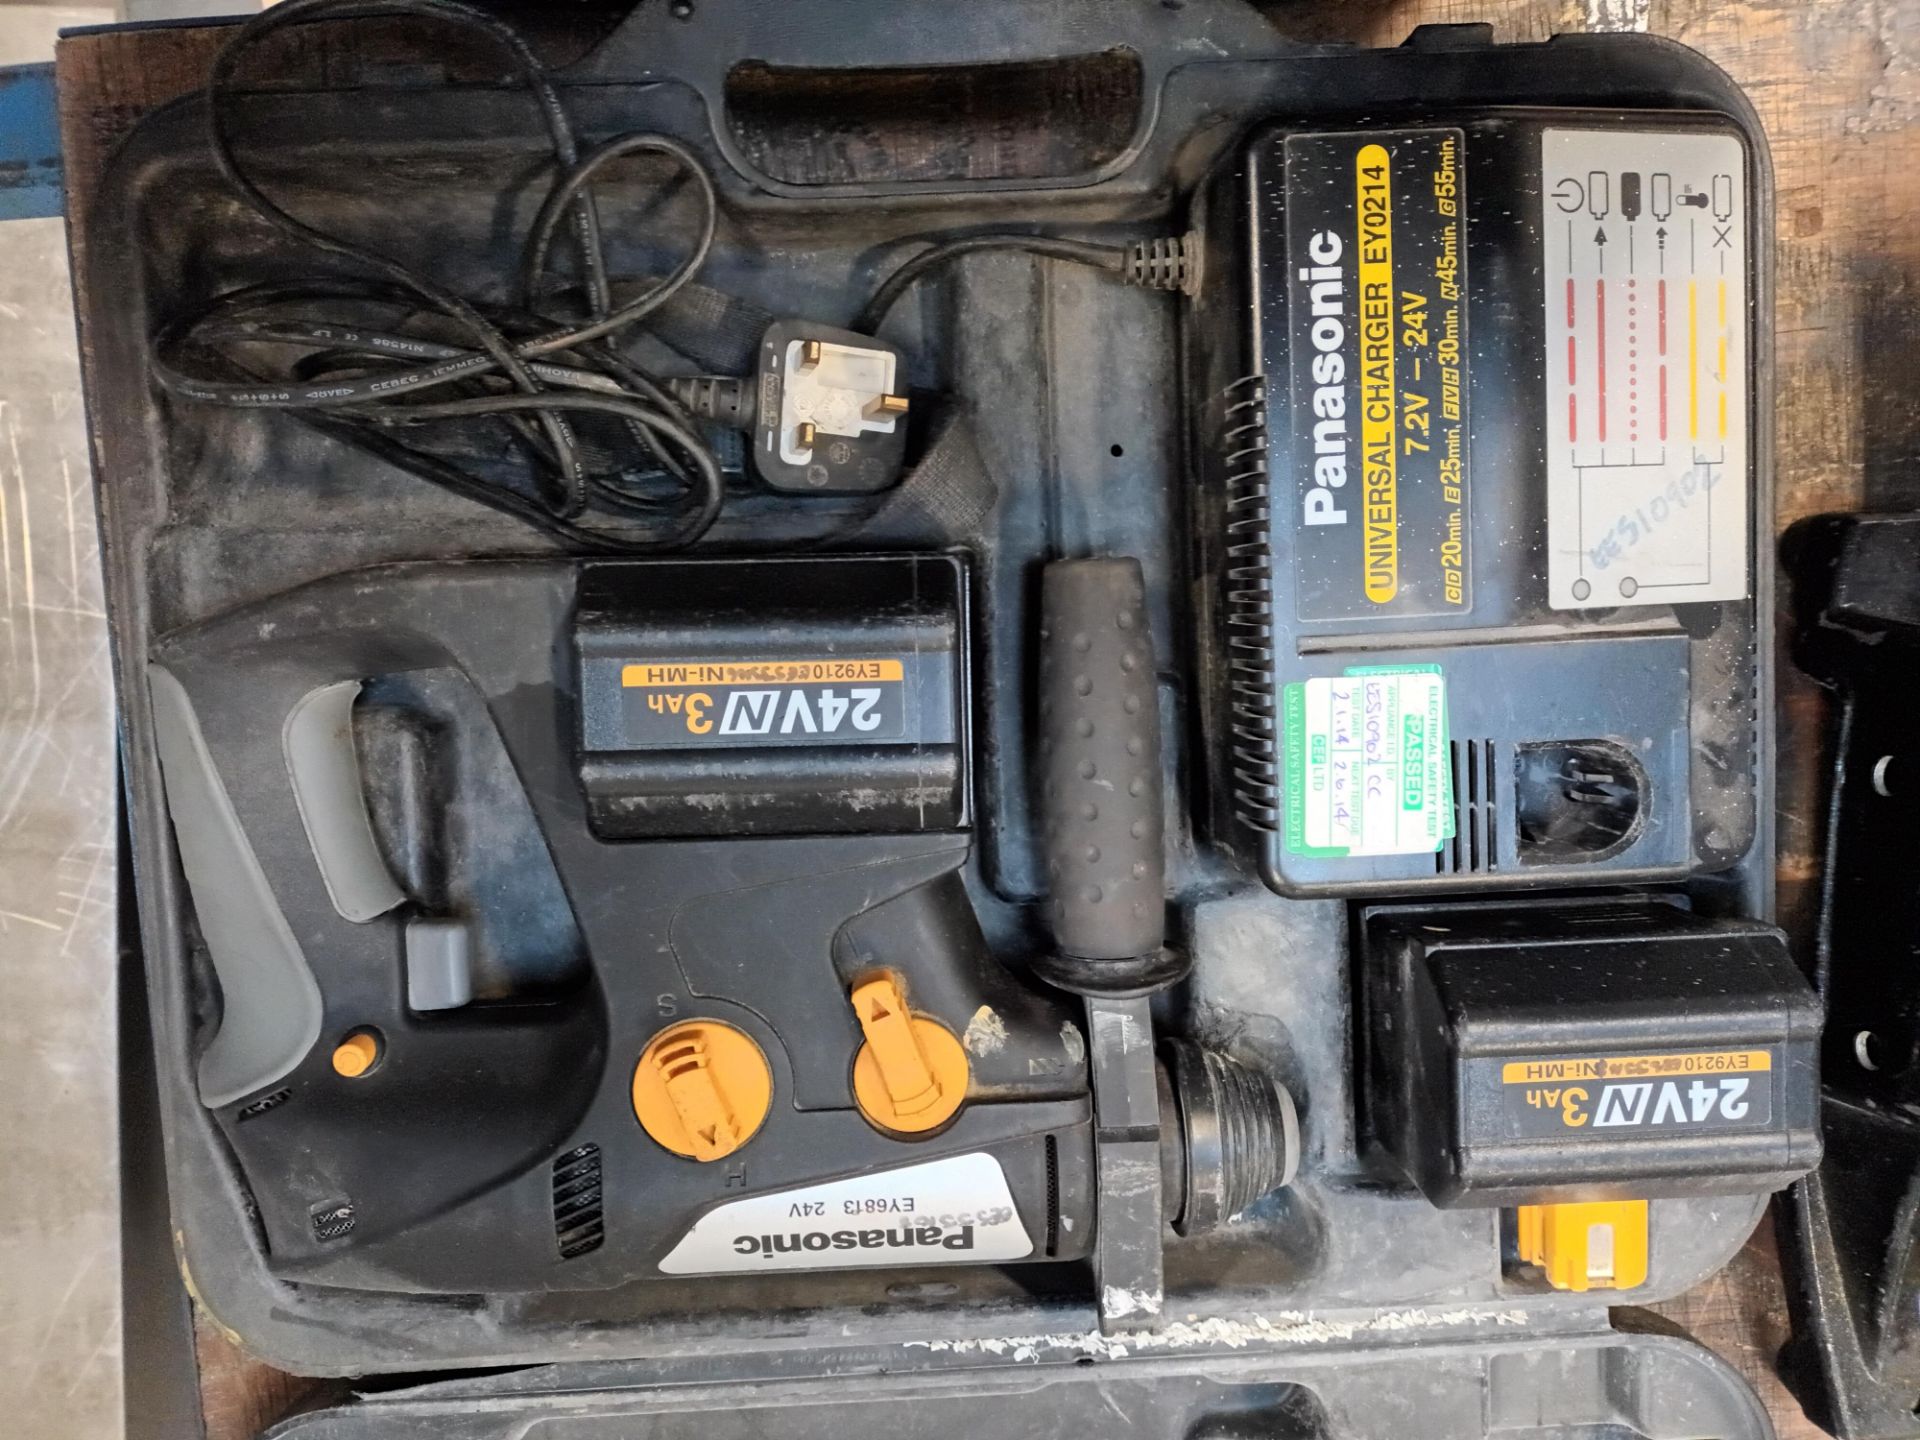 Panasonic EY6813 cordless hammer drill with carry case, two batteries and charger - Image 2 of 3